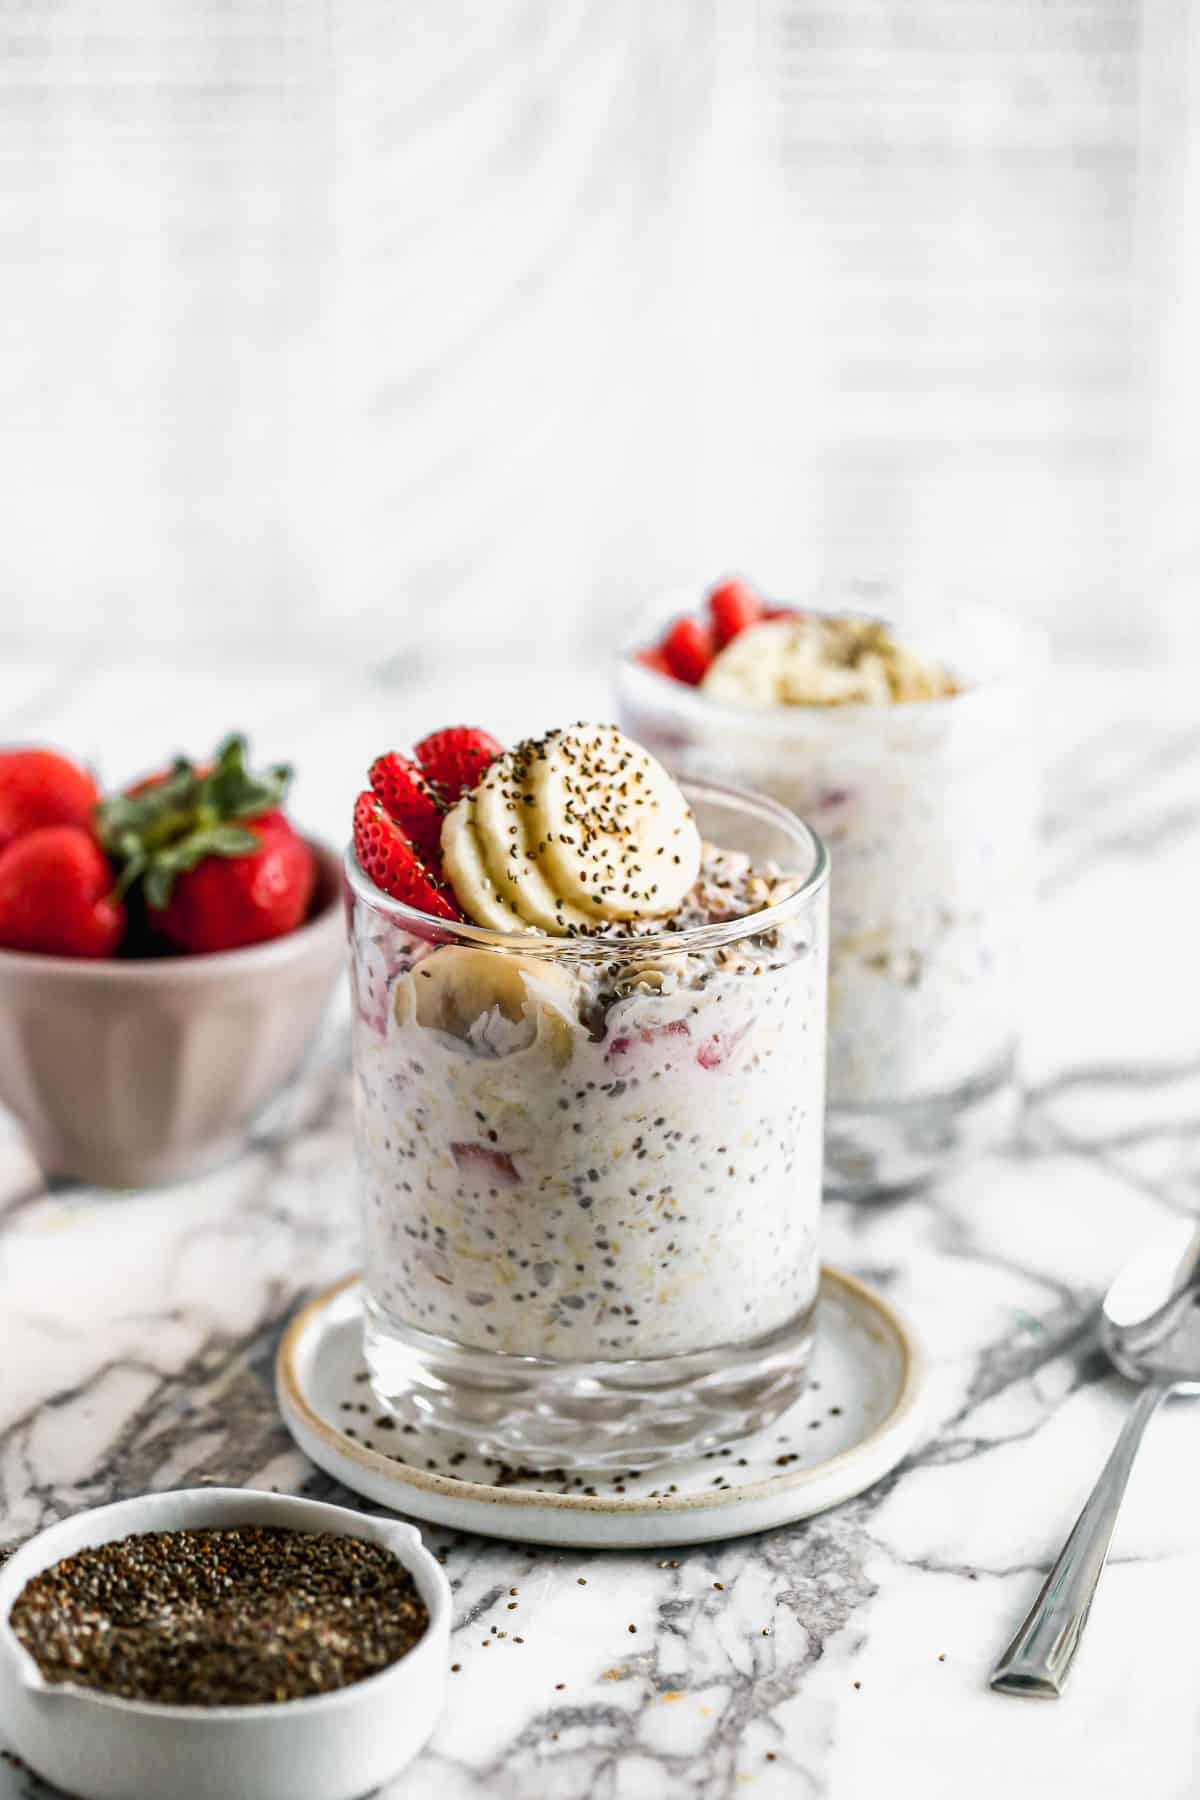 A strawberry overnight oats recipe topped with fresh strawberries and bananas, ready to eat.